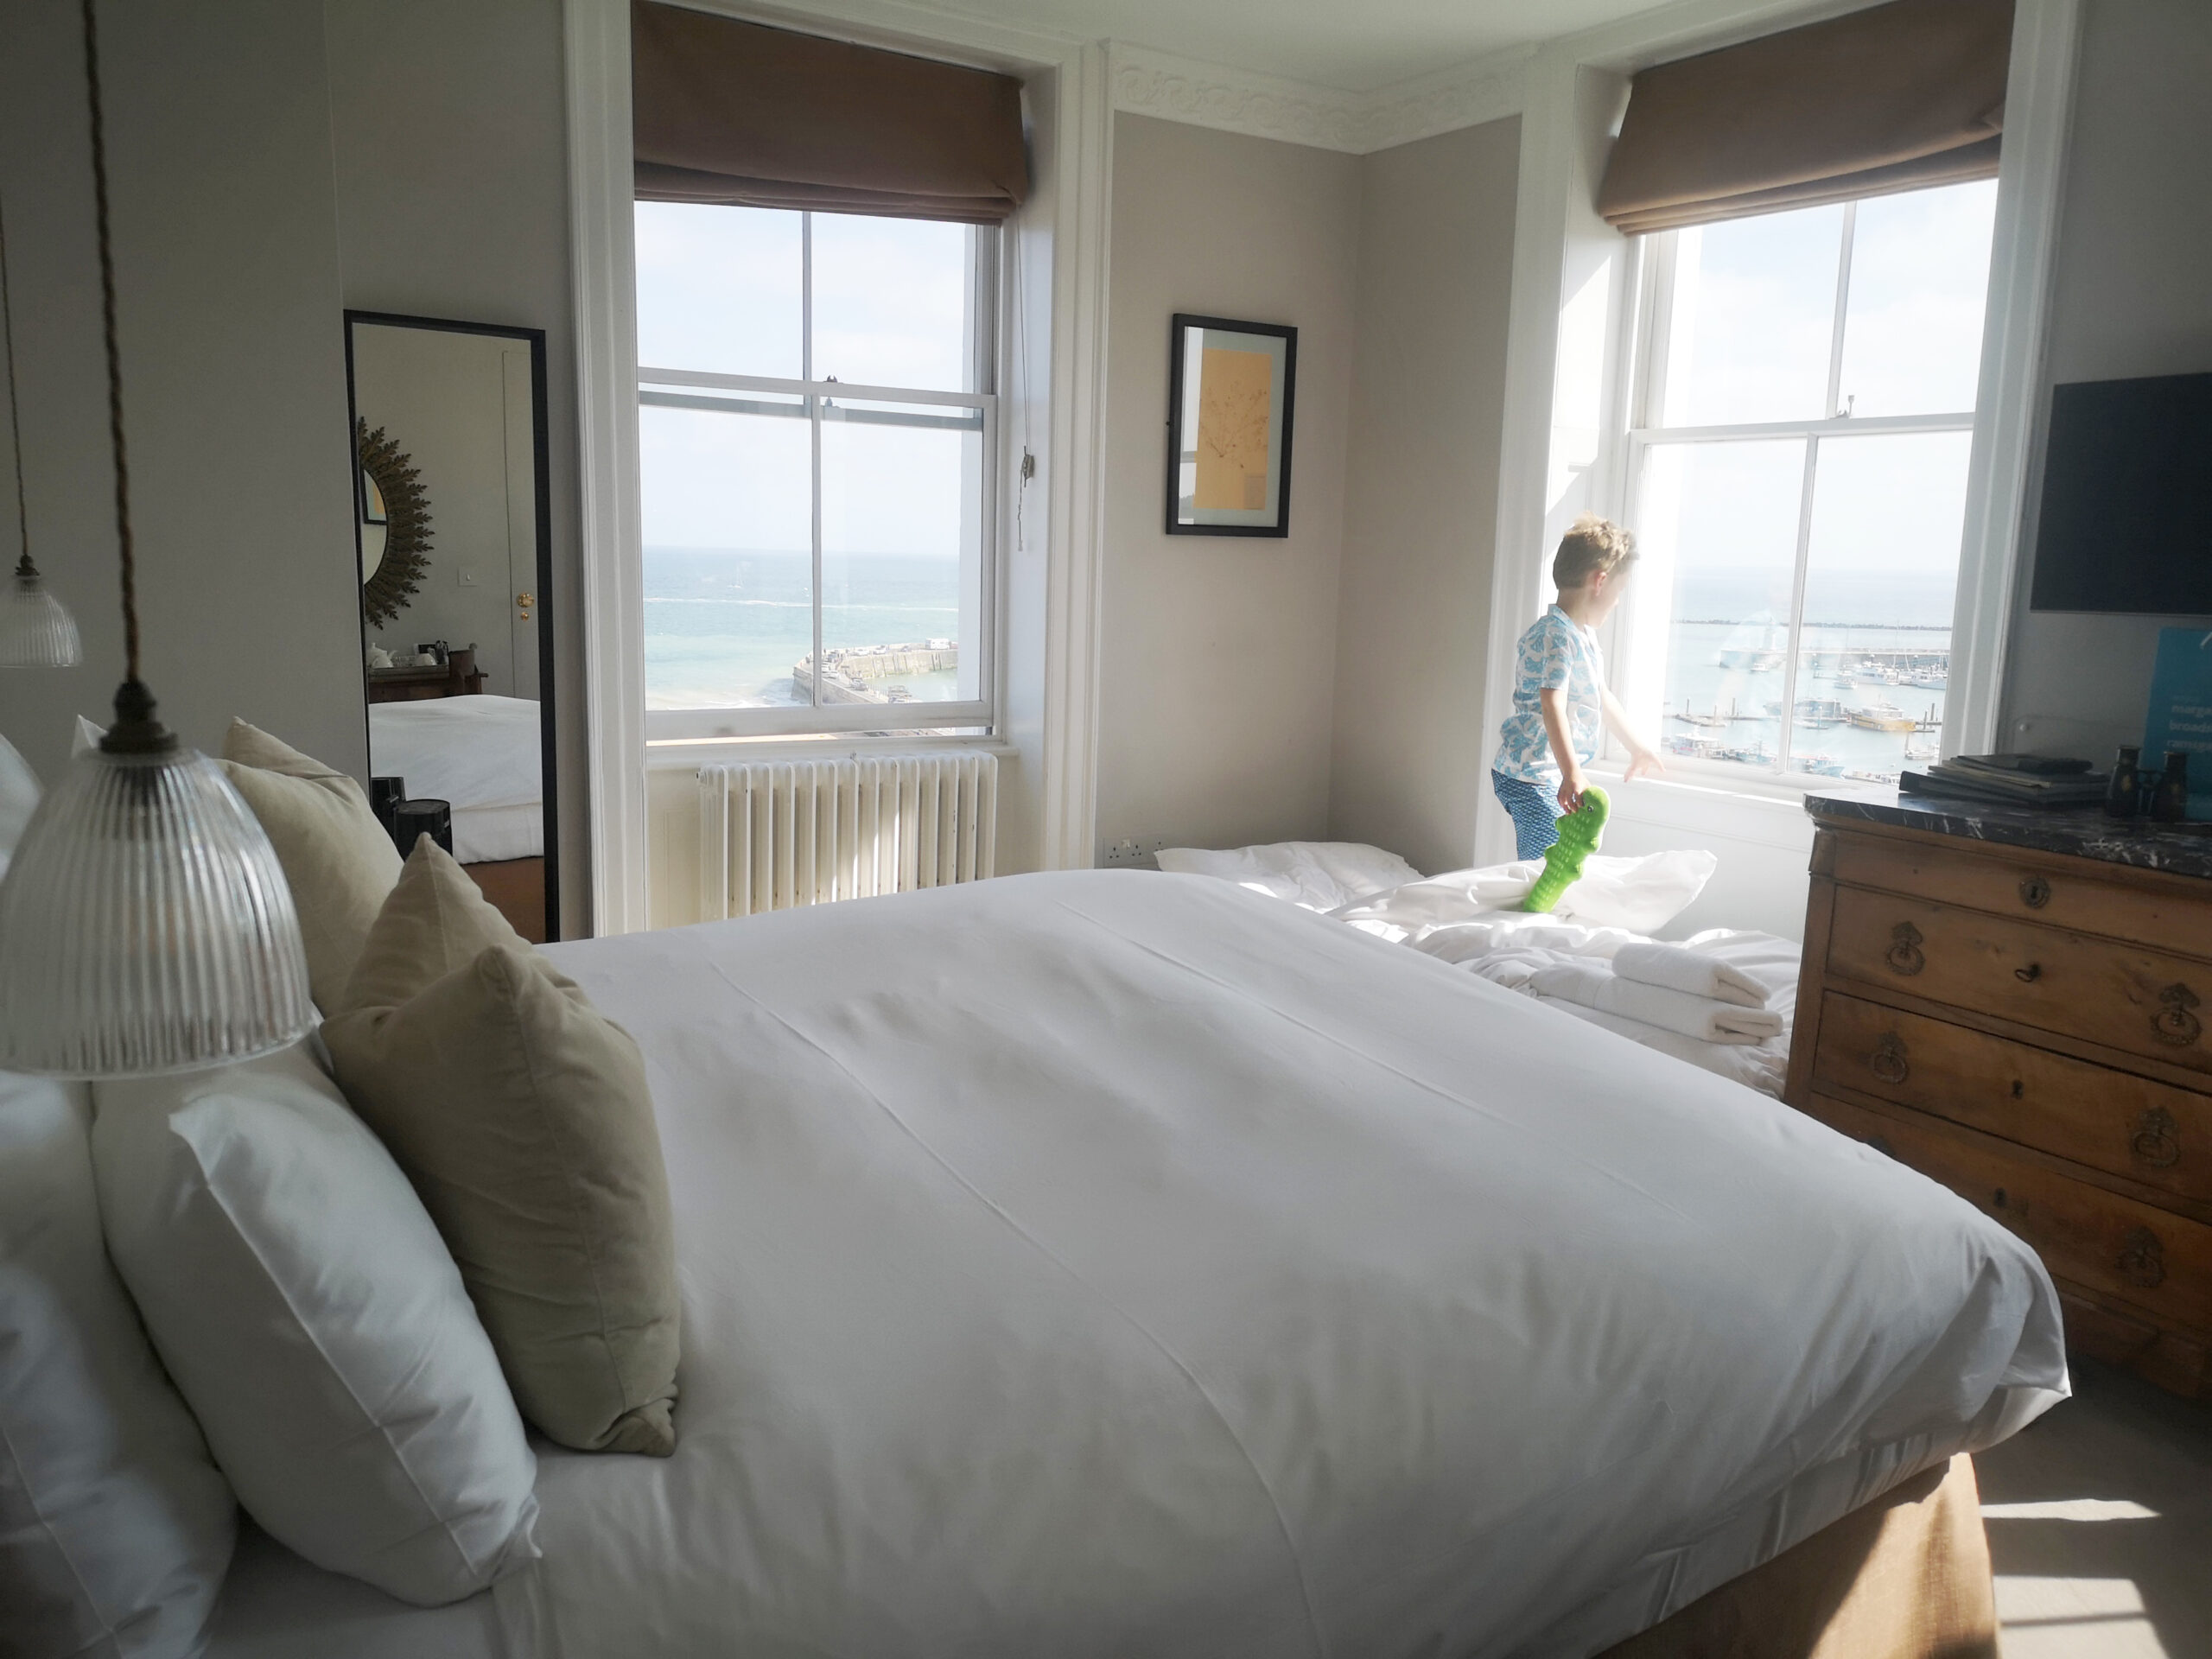 Isle Of Thanet, Visit Thanet, Kent Coast, Family in Kent, Kent Weekend, Visit Kent, South-East Coast, Press Trip, Family-friendly, Kent Review, Ramsgate, the Frenchie Mummy, the Albion House Ramsgate